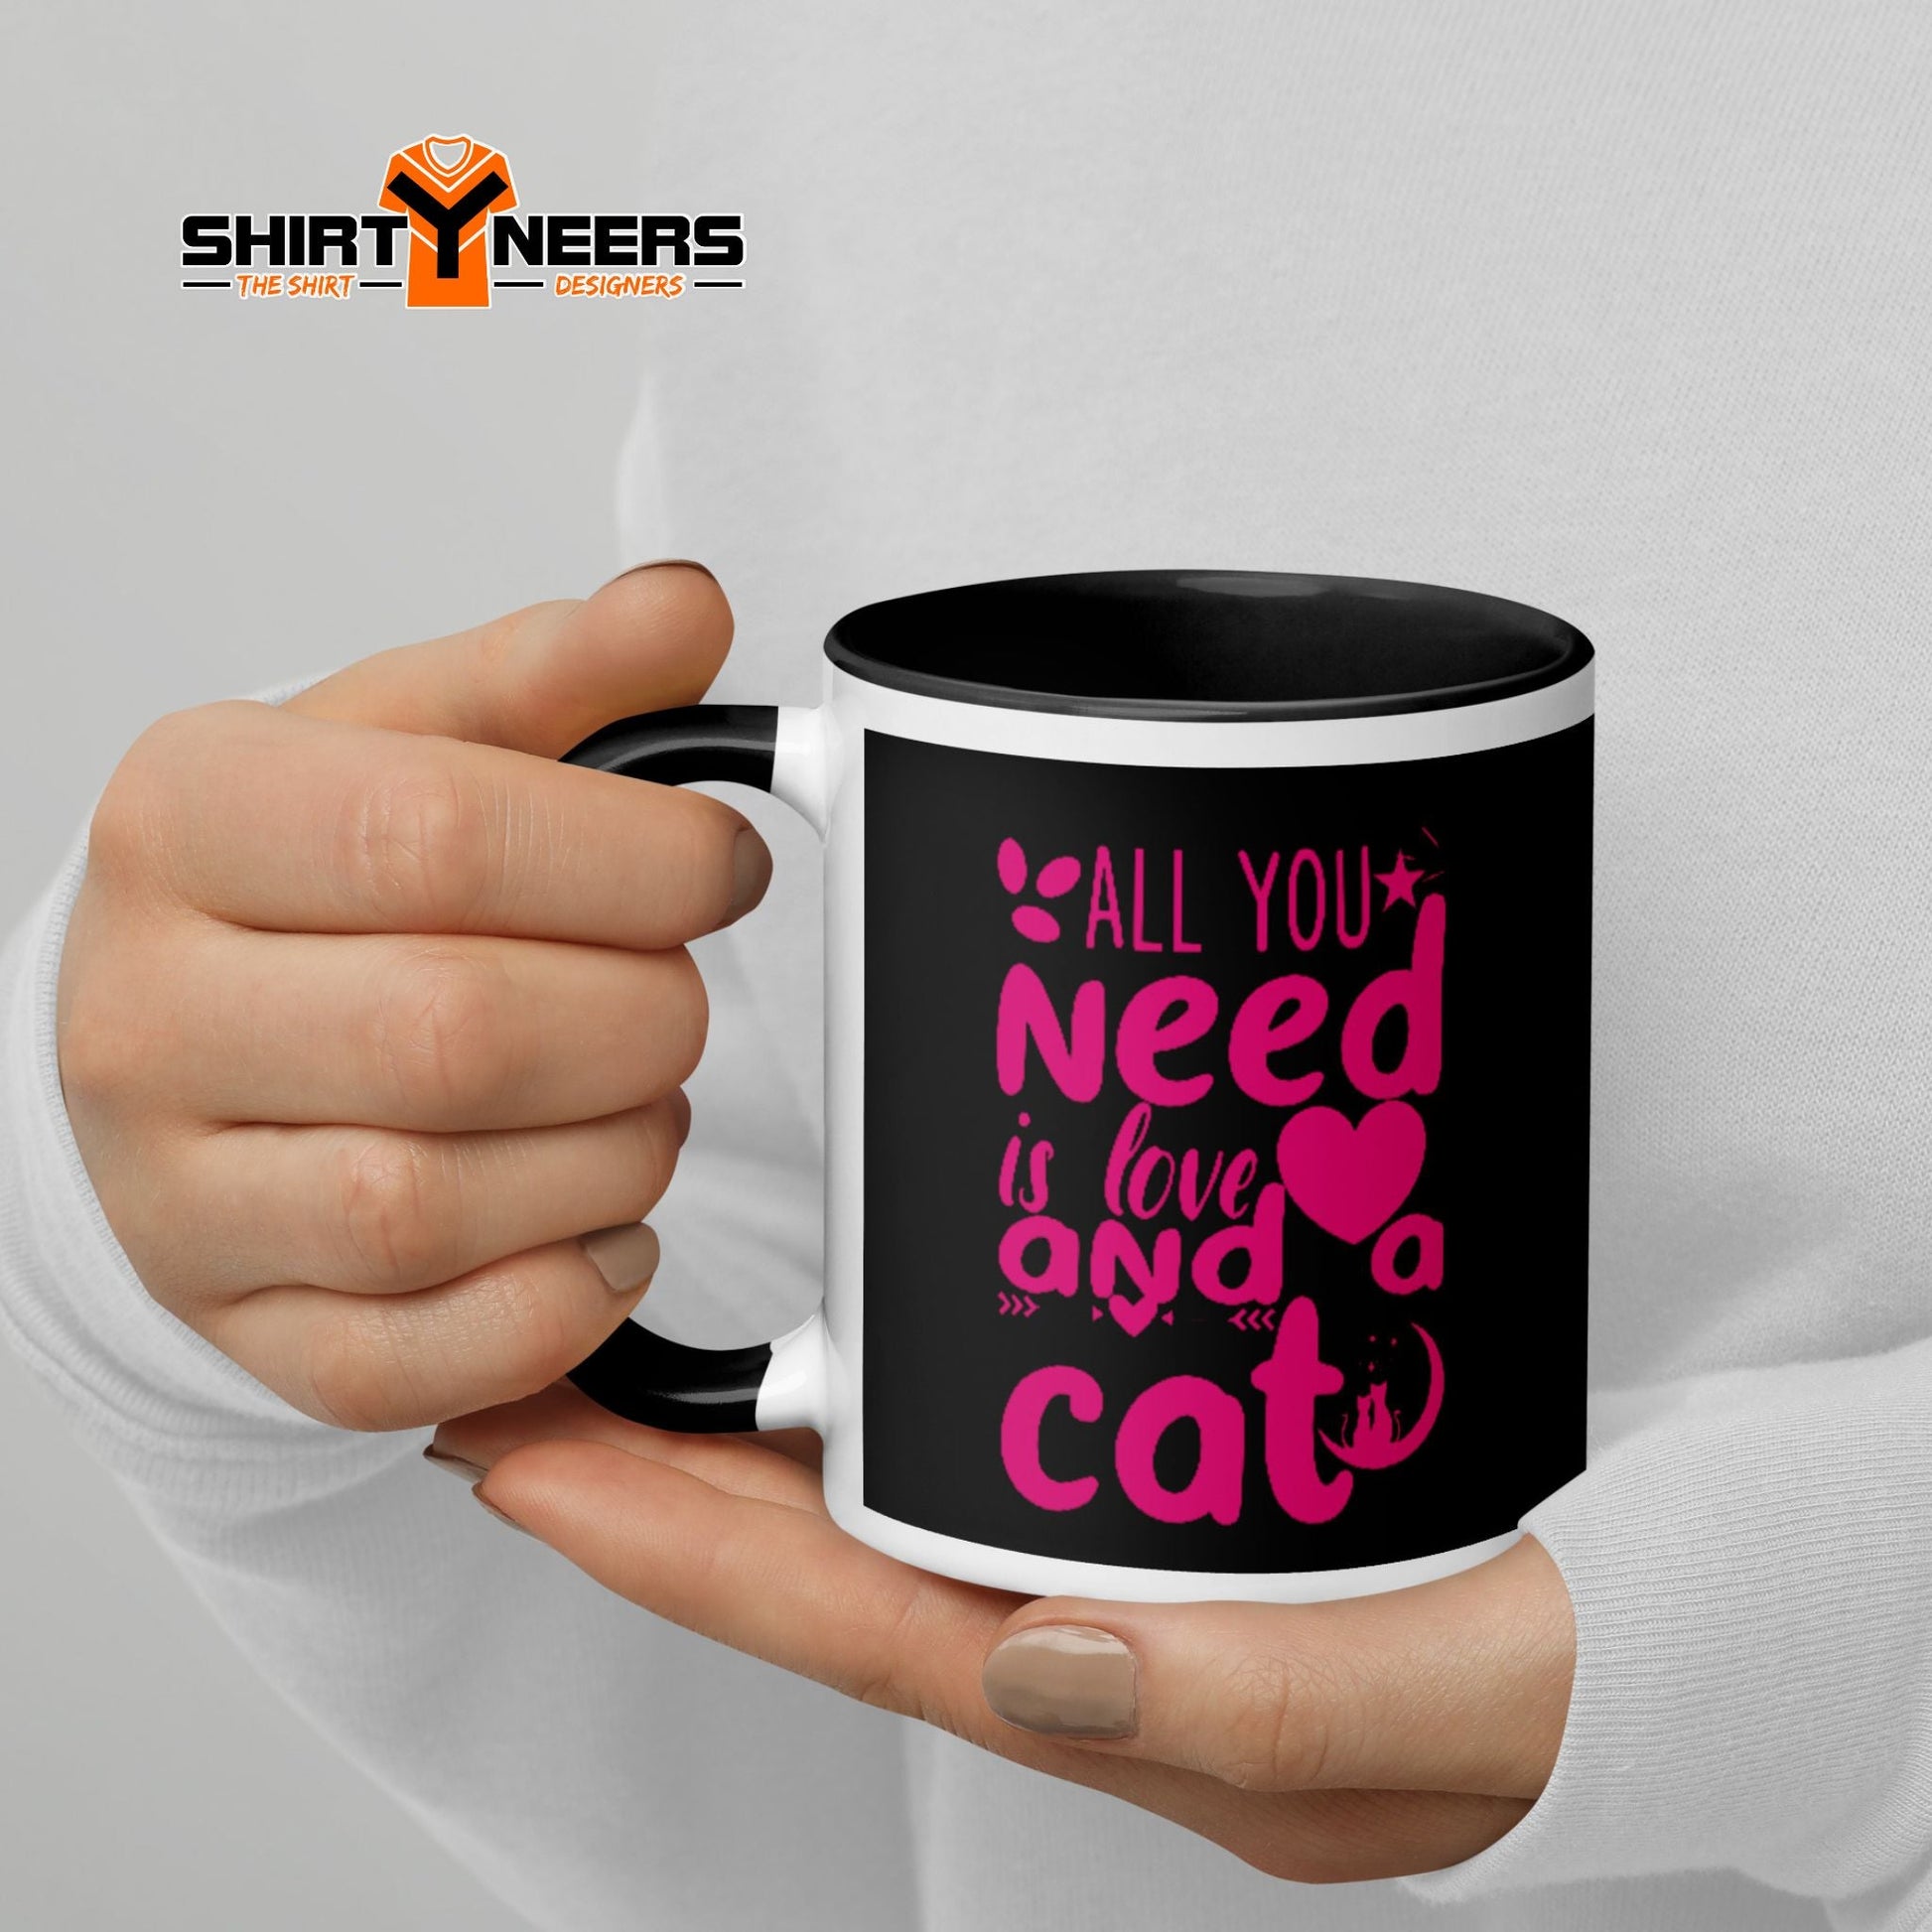 All you need is love and a cat – Tasse mit Aufdruck -